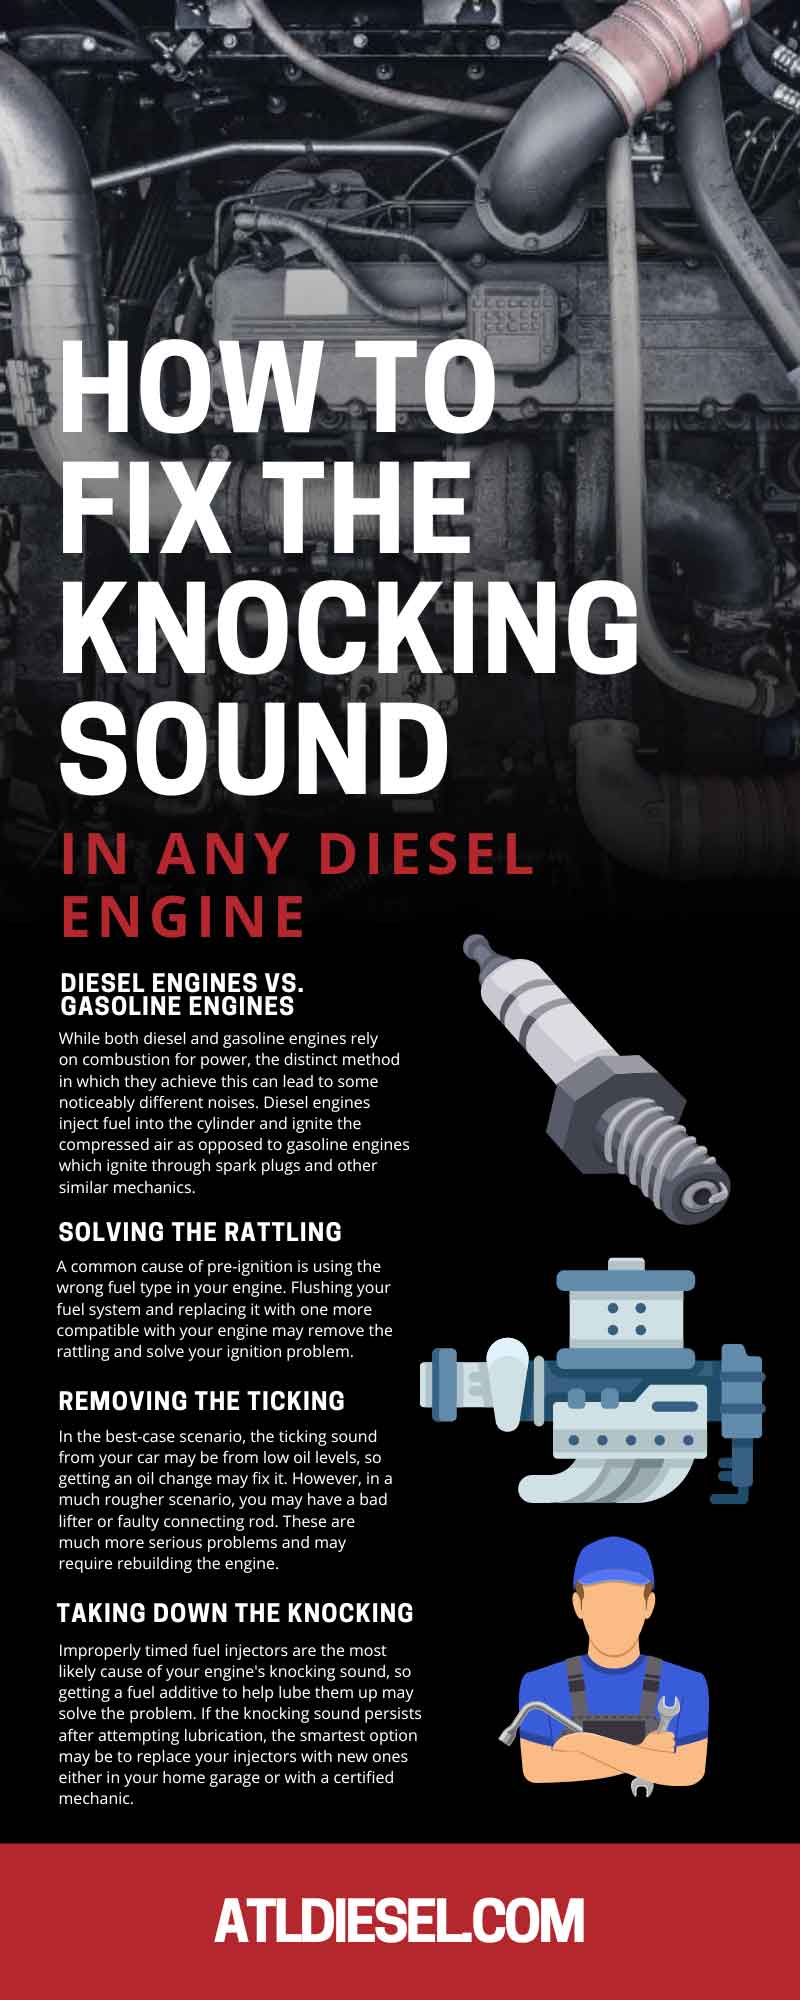 How To Fix the Knocking Sound in Any Diesel Engine